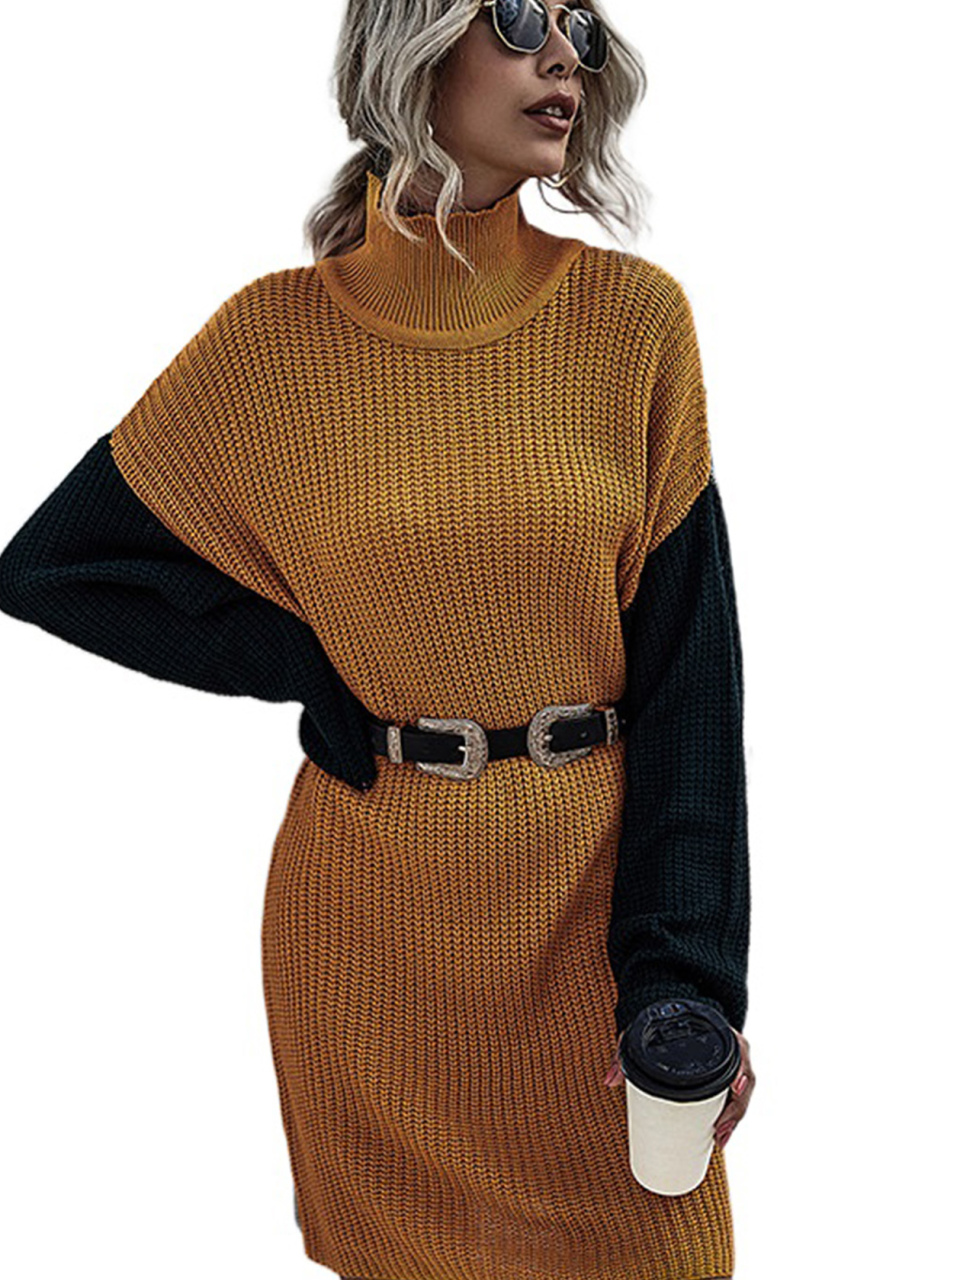 Ladies Pullover Contrast Color Stitching Sweater Dress